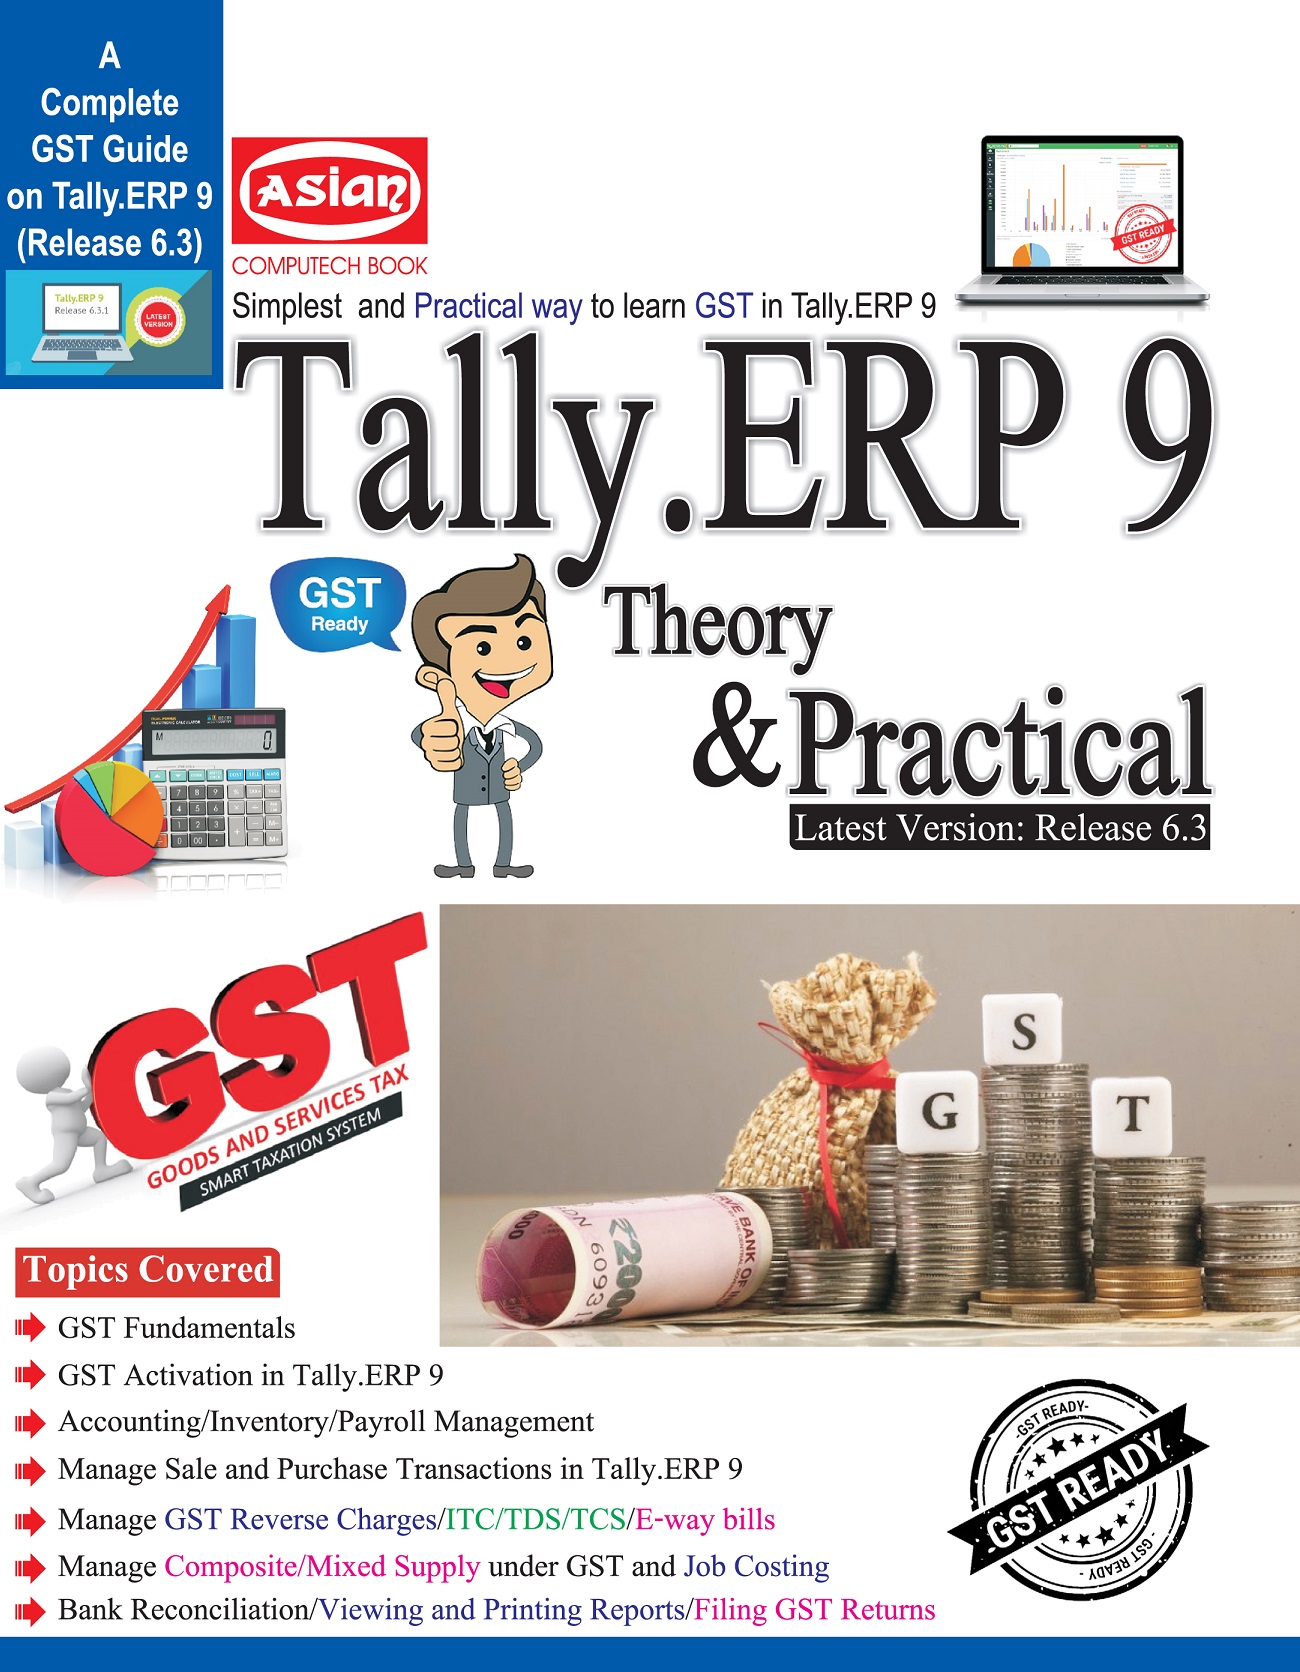 practical assignment of tally.erp 9 pdf